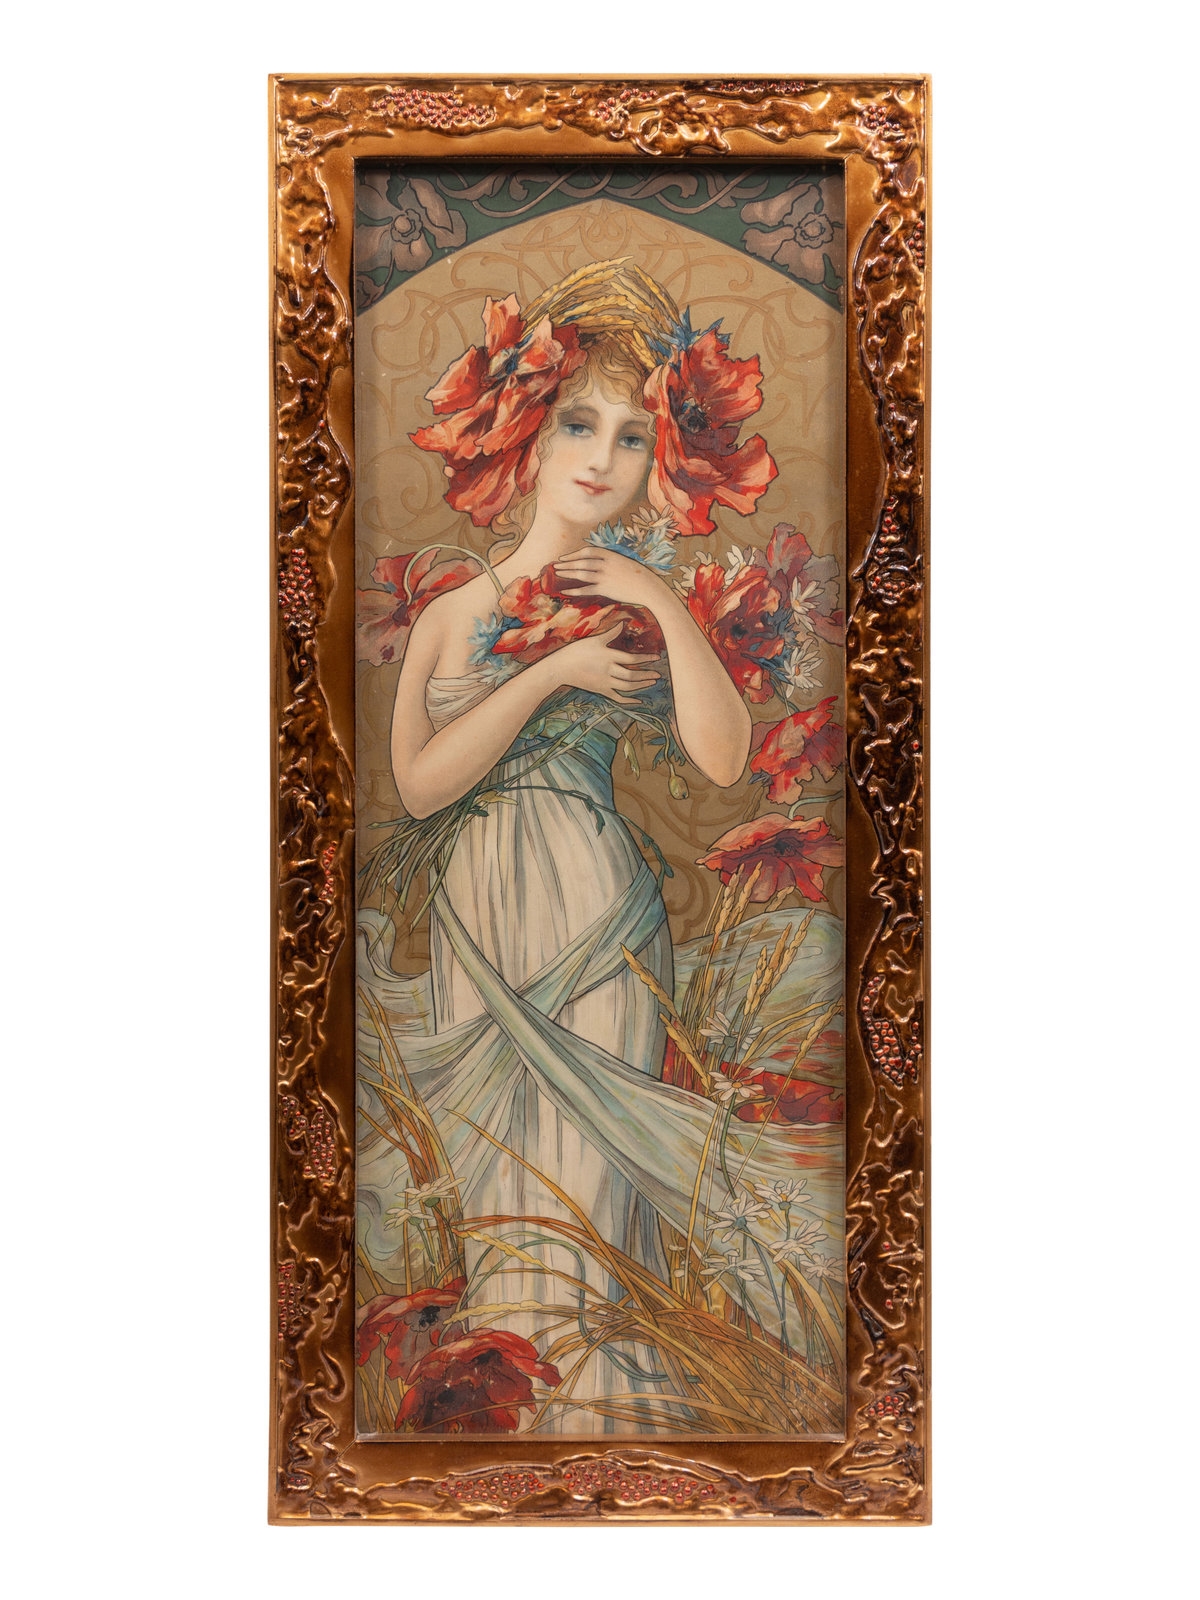 Artwork by Mary Golay, A Mary Golay Chromolithograph, Made of Chromolithograph